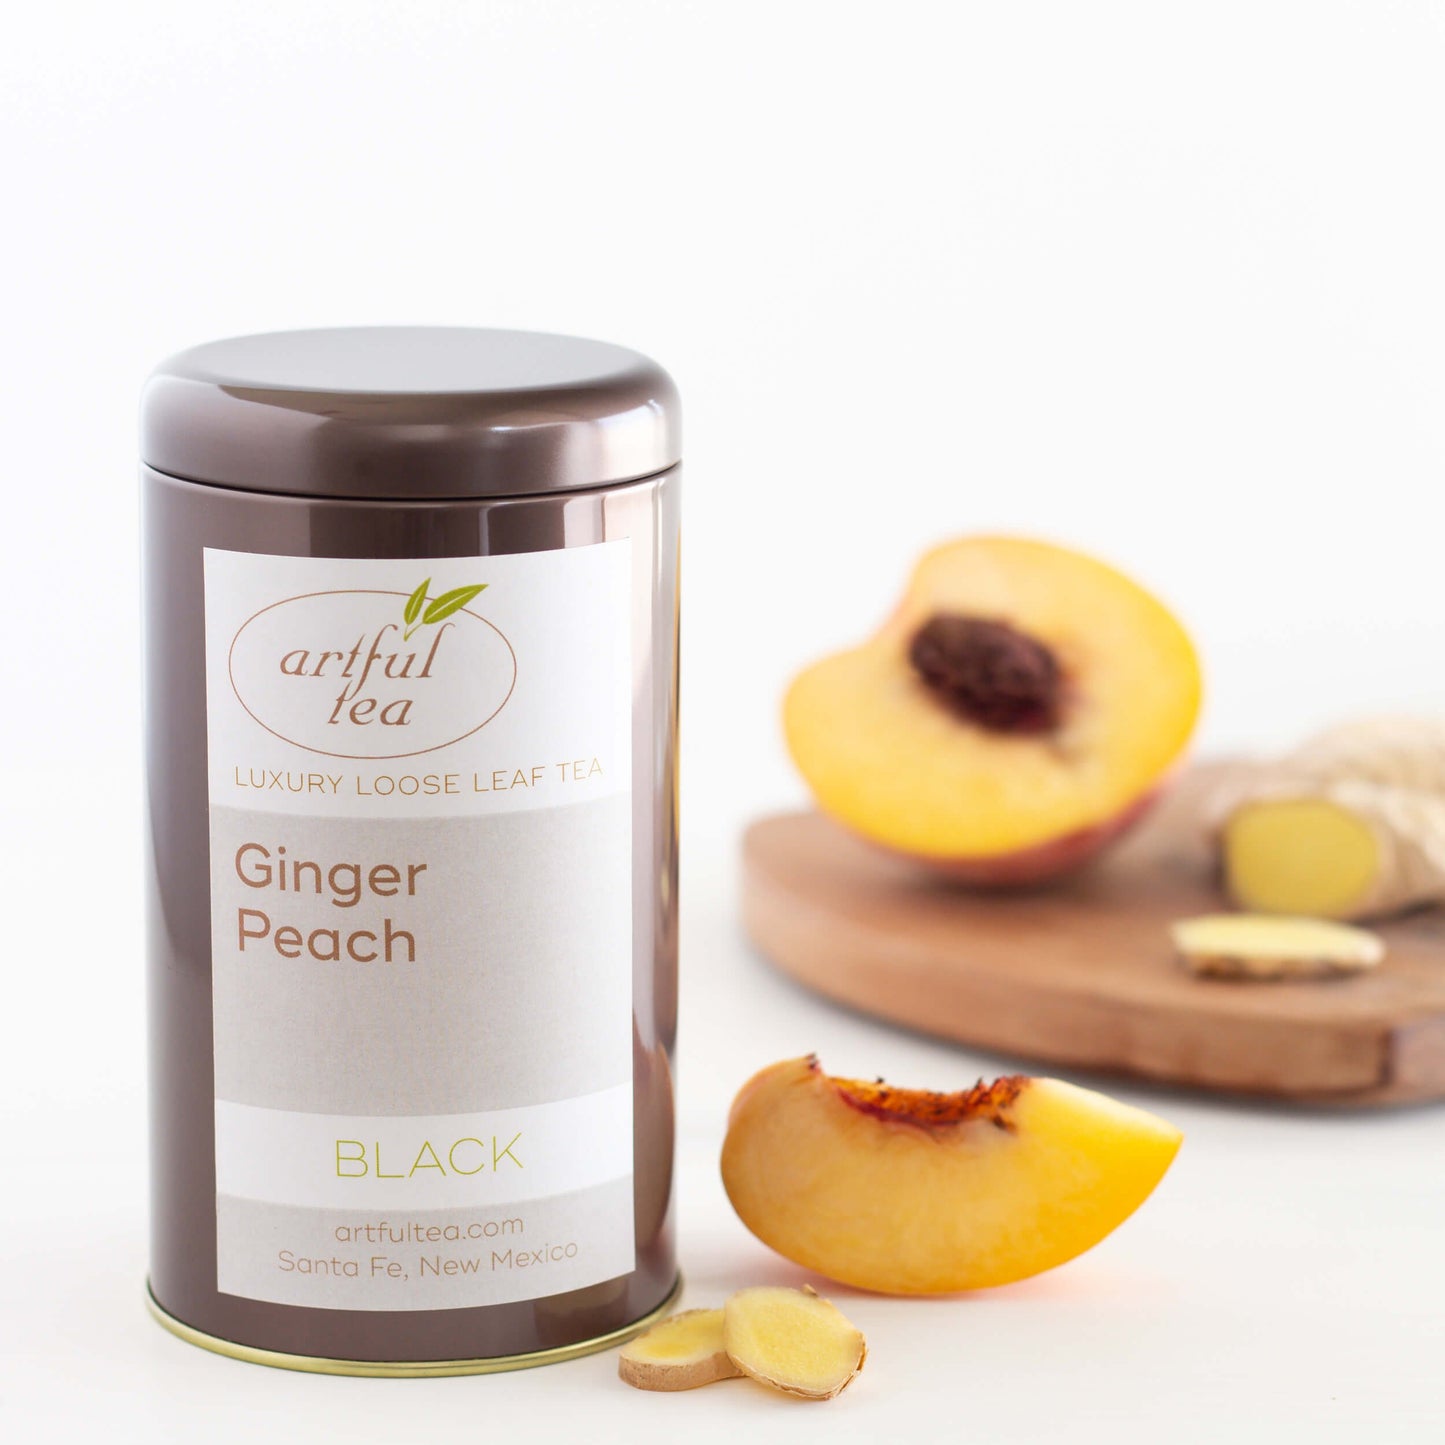 Ginger Peach Black Tea shown packaged in a brown tin next to a wedge of fresh peach and two slices of fresh ginger. A peach half and more ginger are displayed on a wooded board in the background